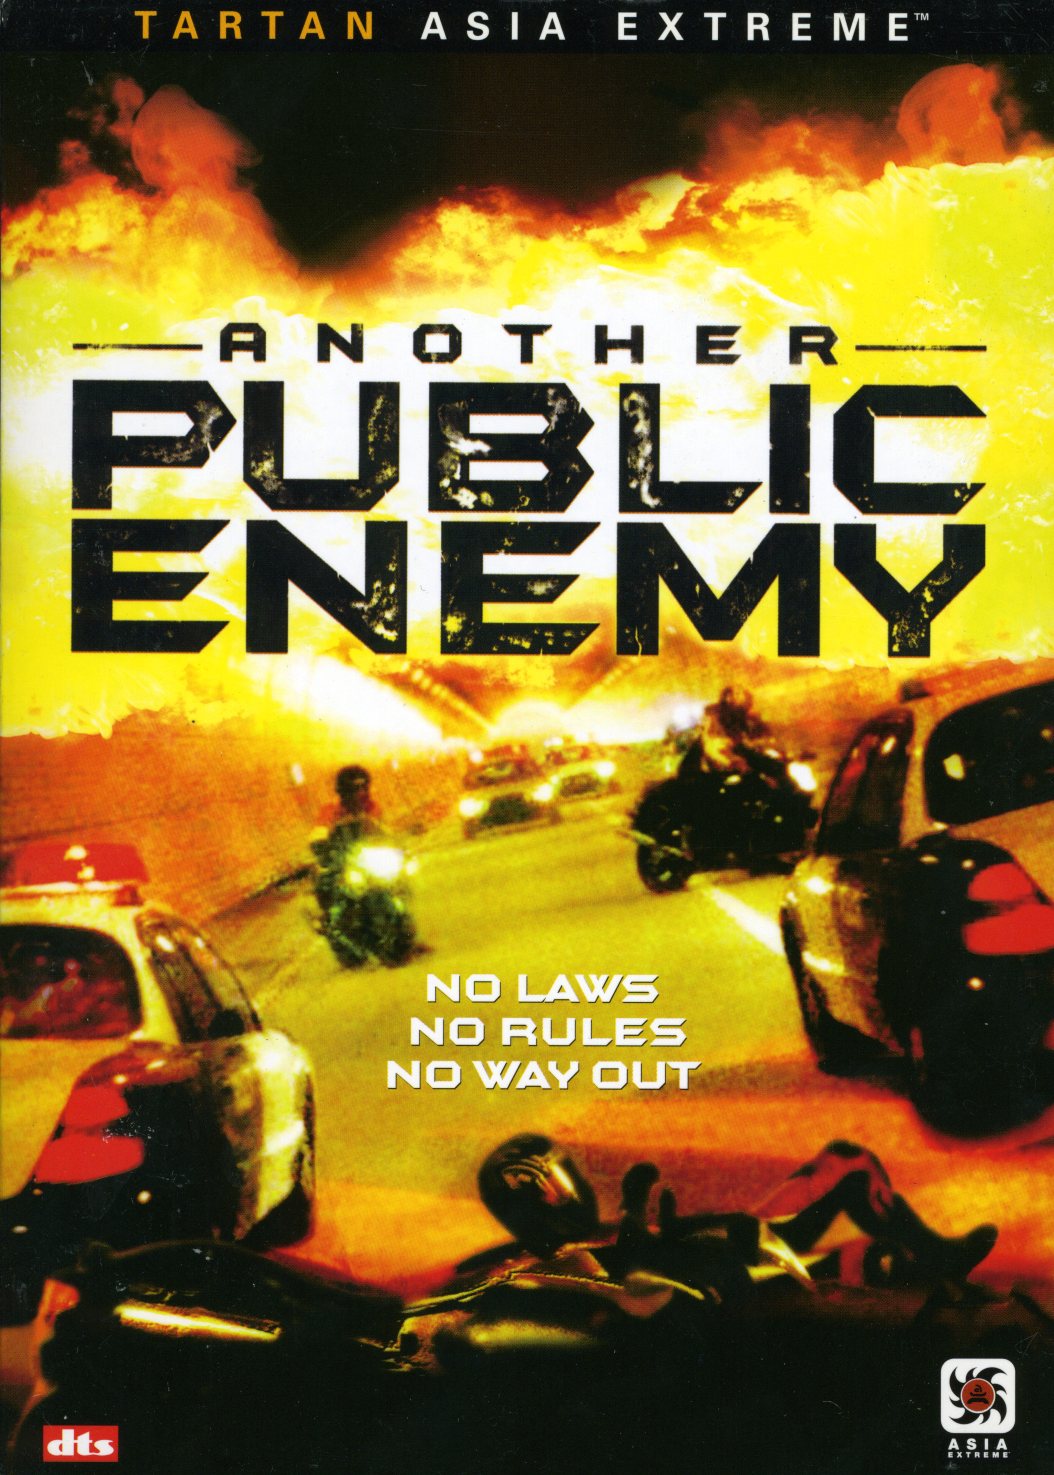 ANOTHER PUBLIC ENEMY (2005) / (AC3 DOL DTS SUB WS)